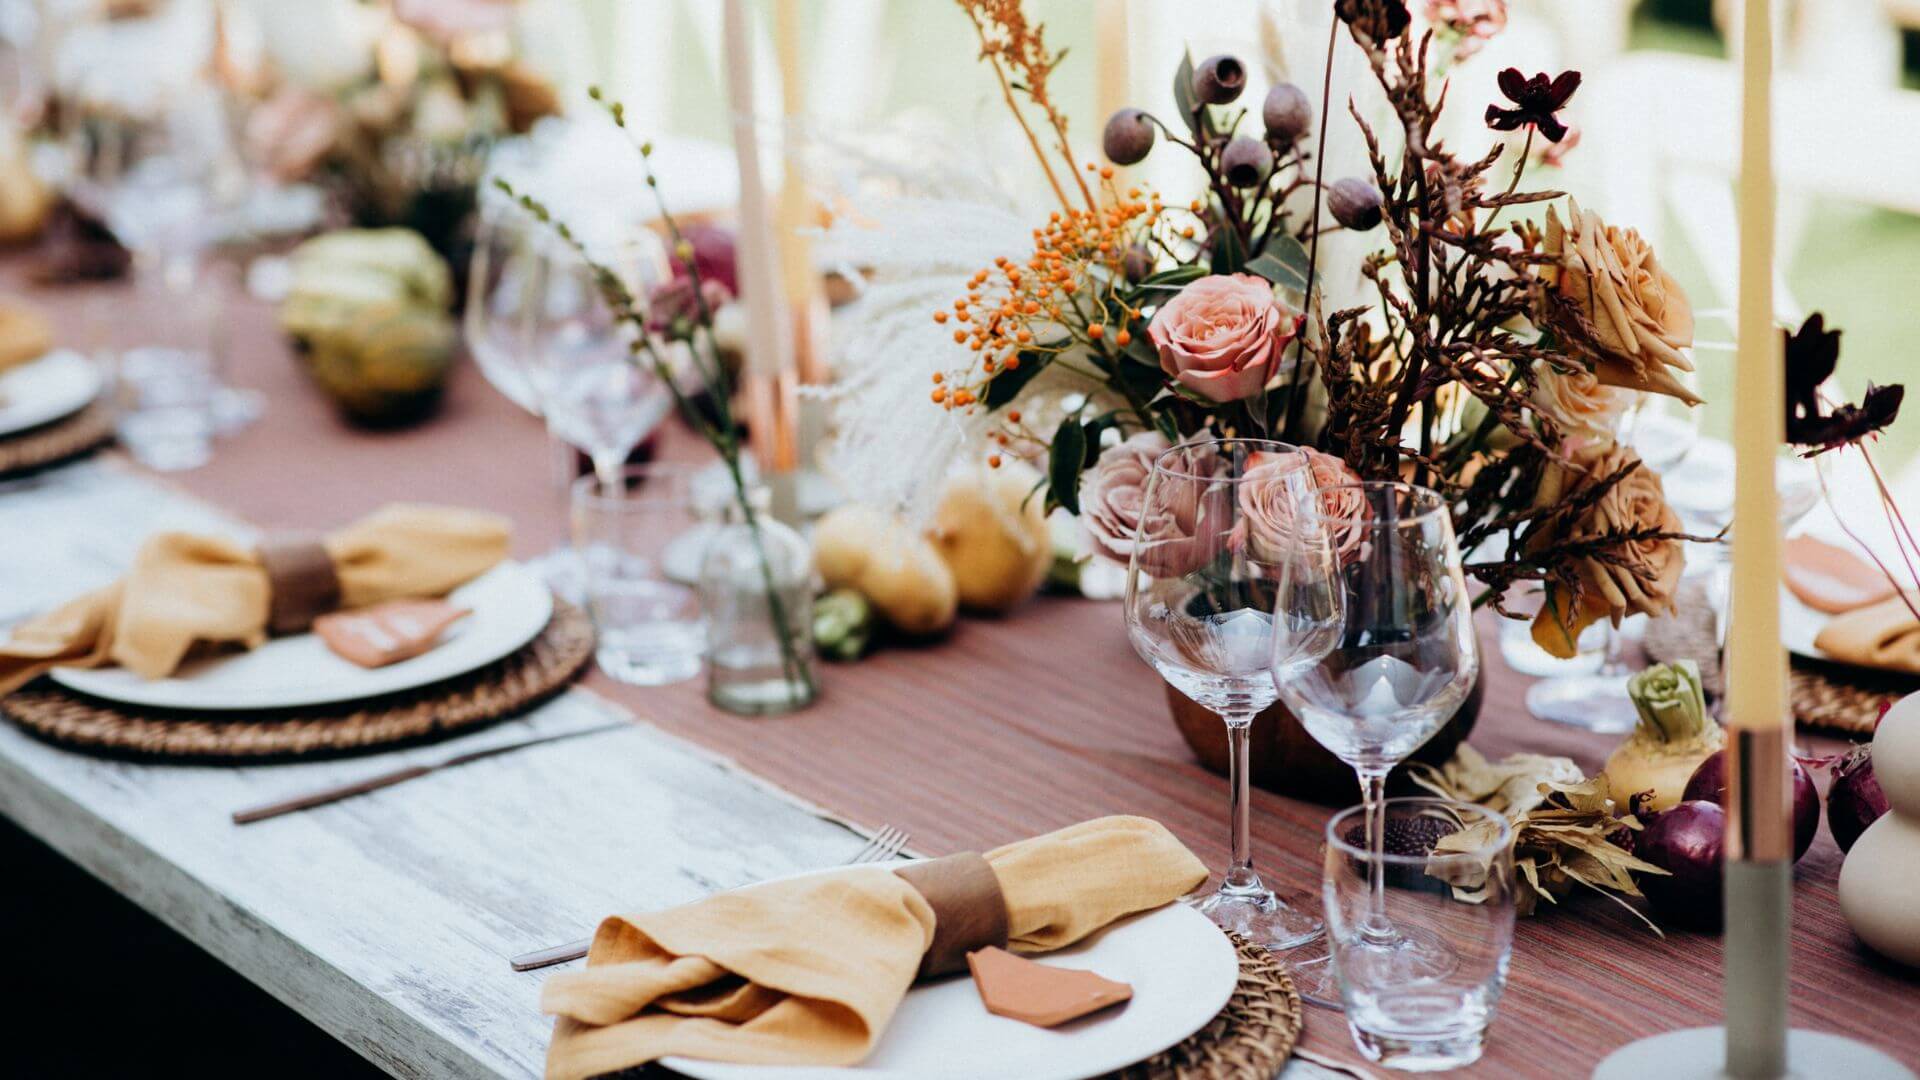 Incorporate an Heirloom Into Your Wedding Ceremony